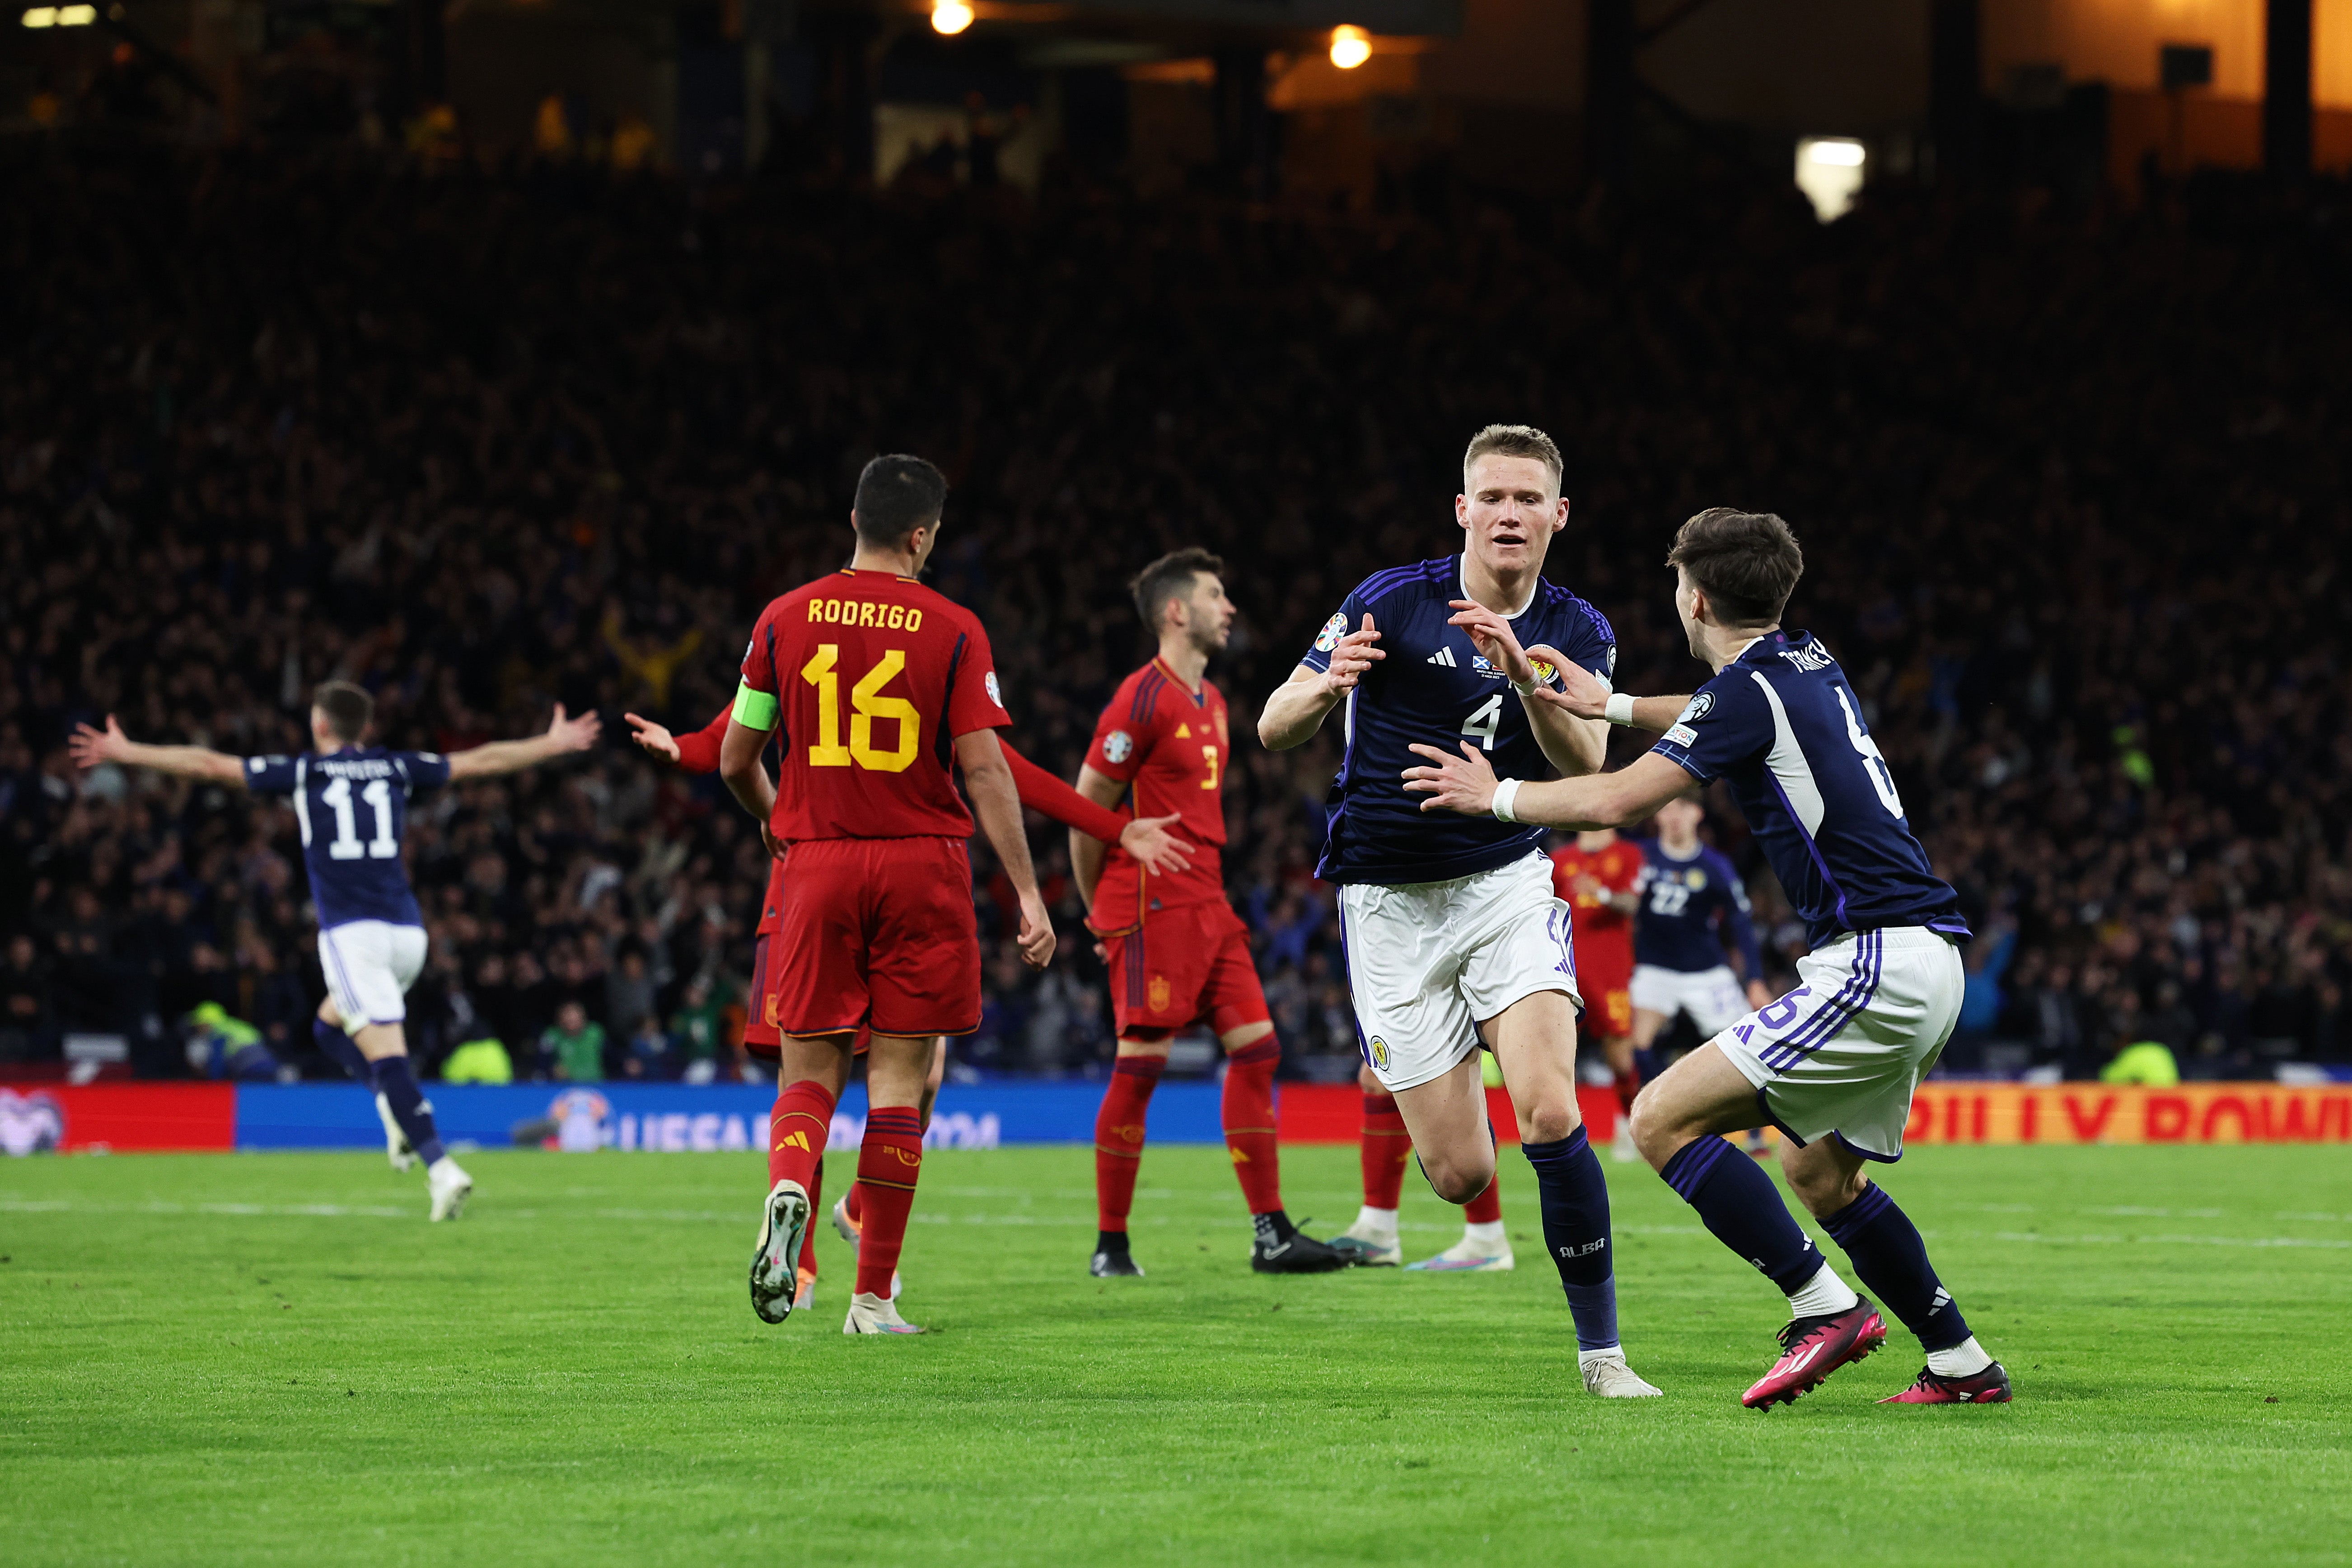 Scotland dared to dream after beating Spain at Hampden